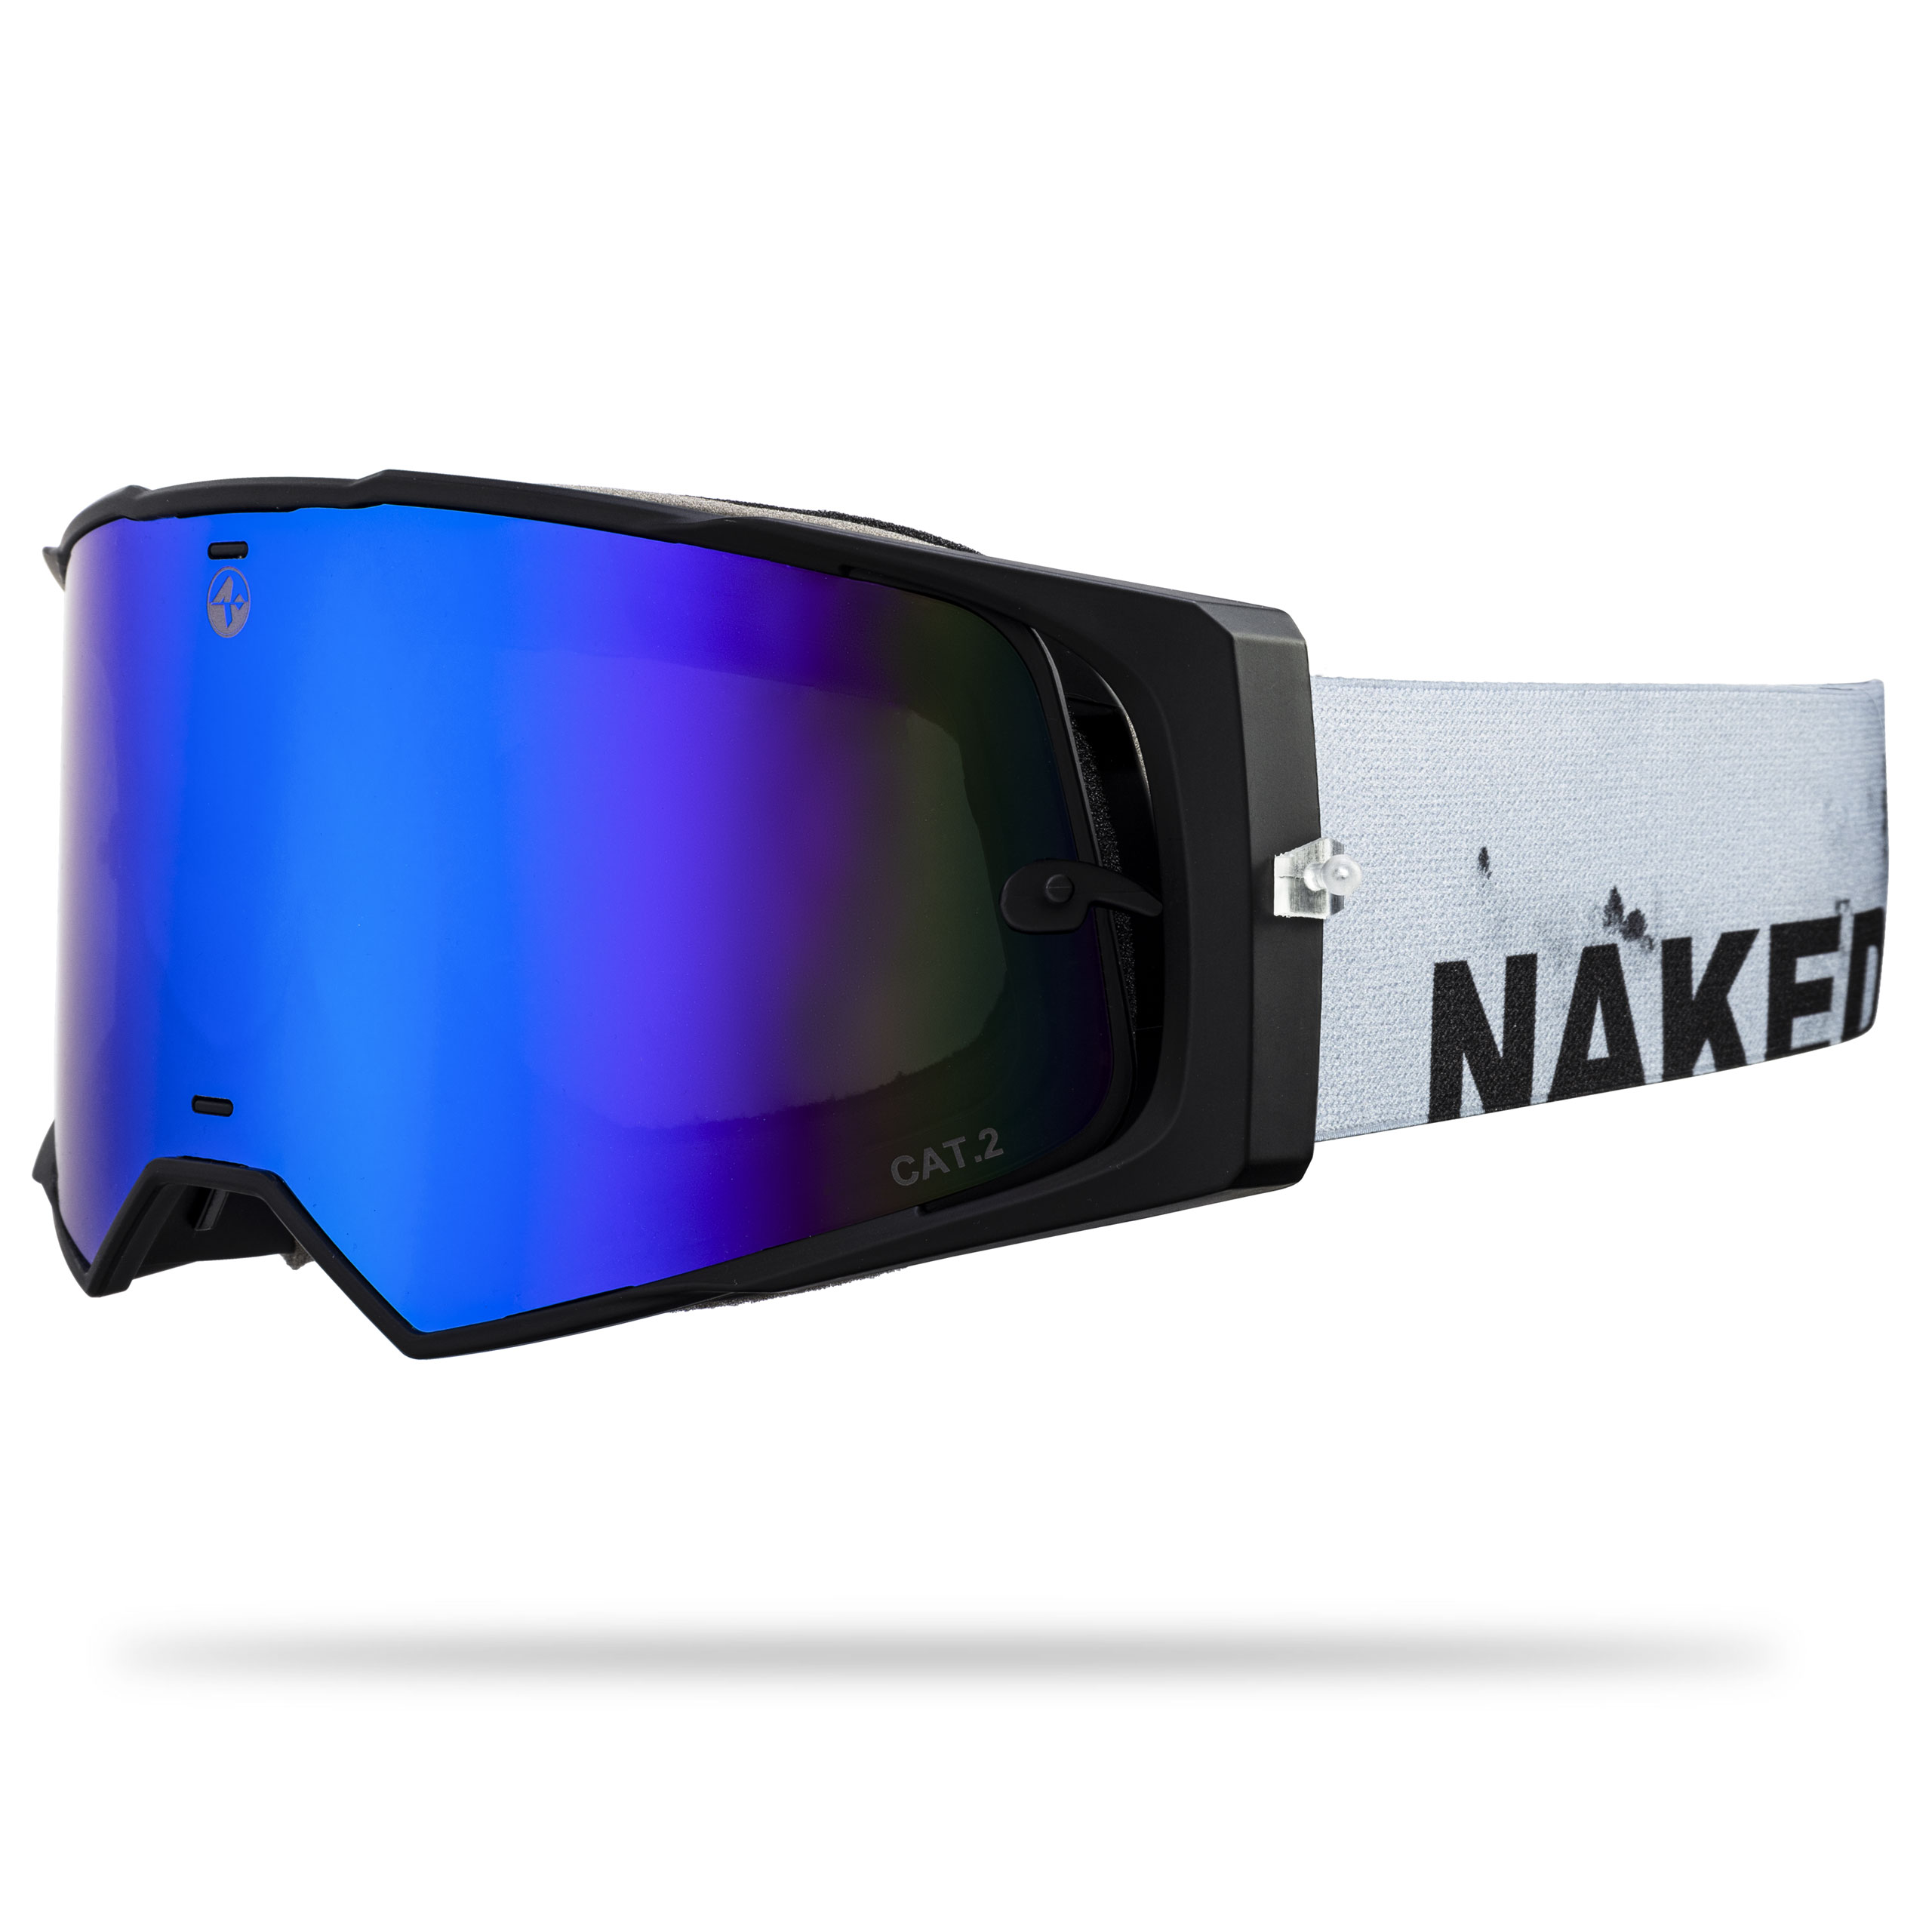 MTB Goggle - Naked - Forest